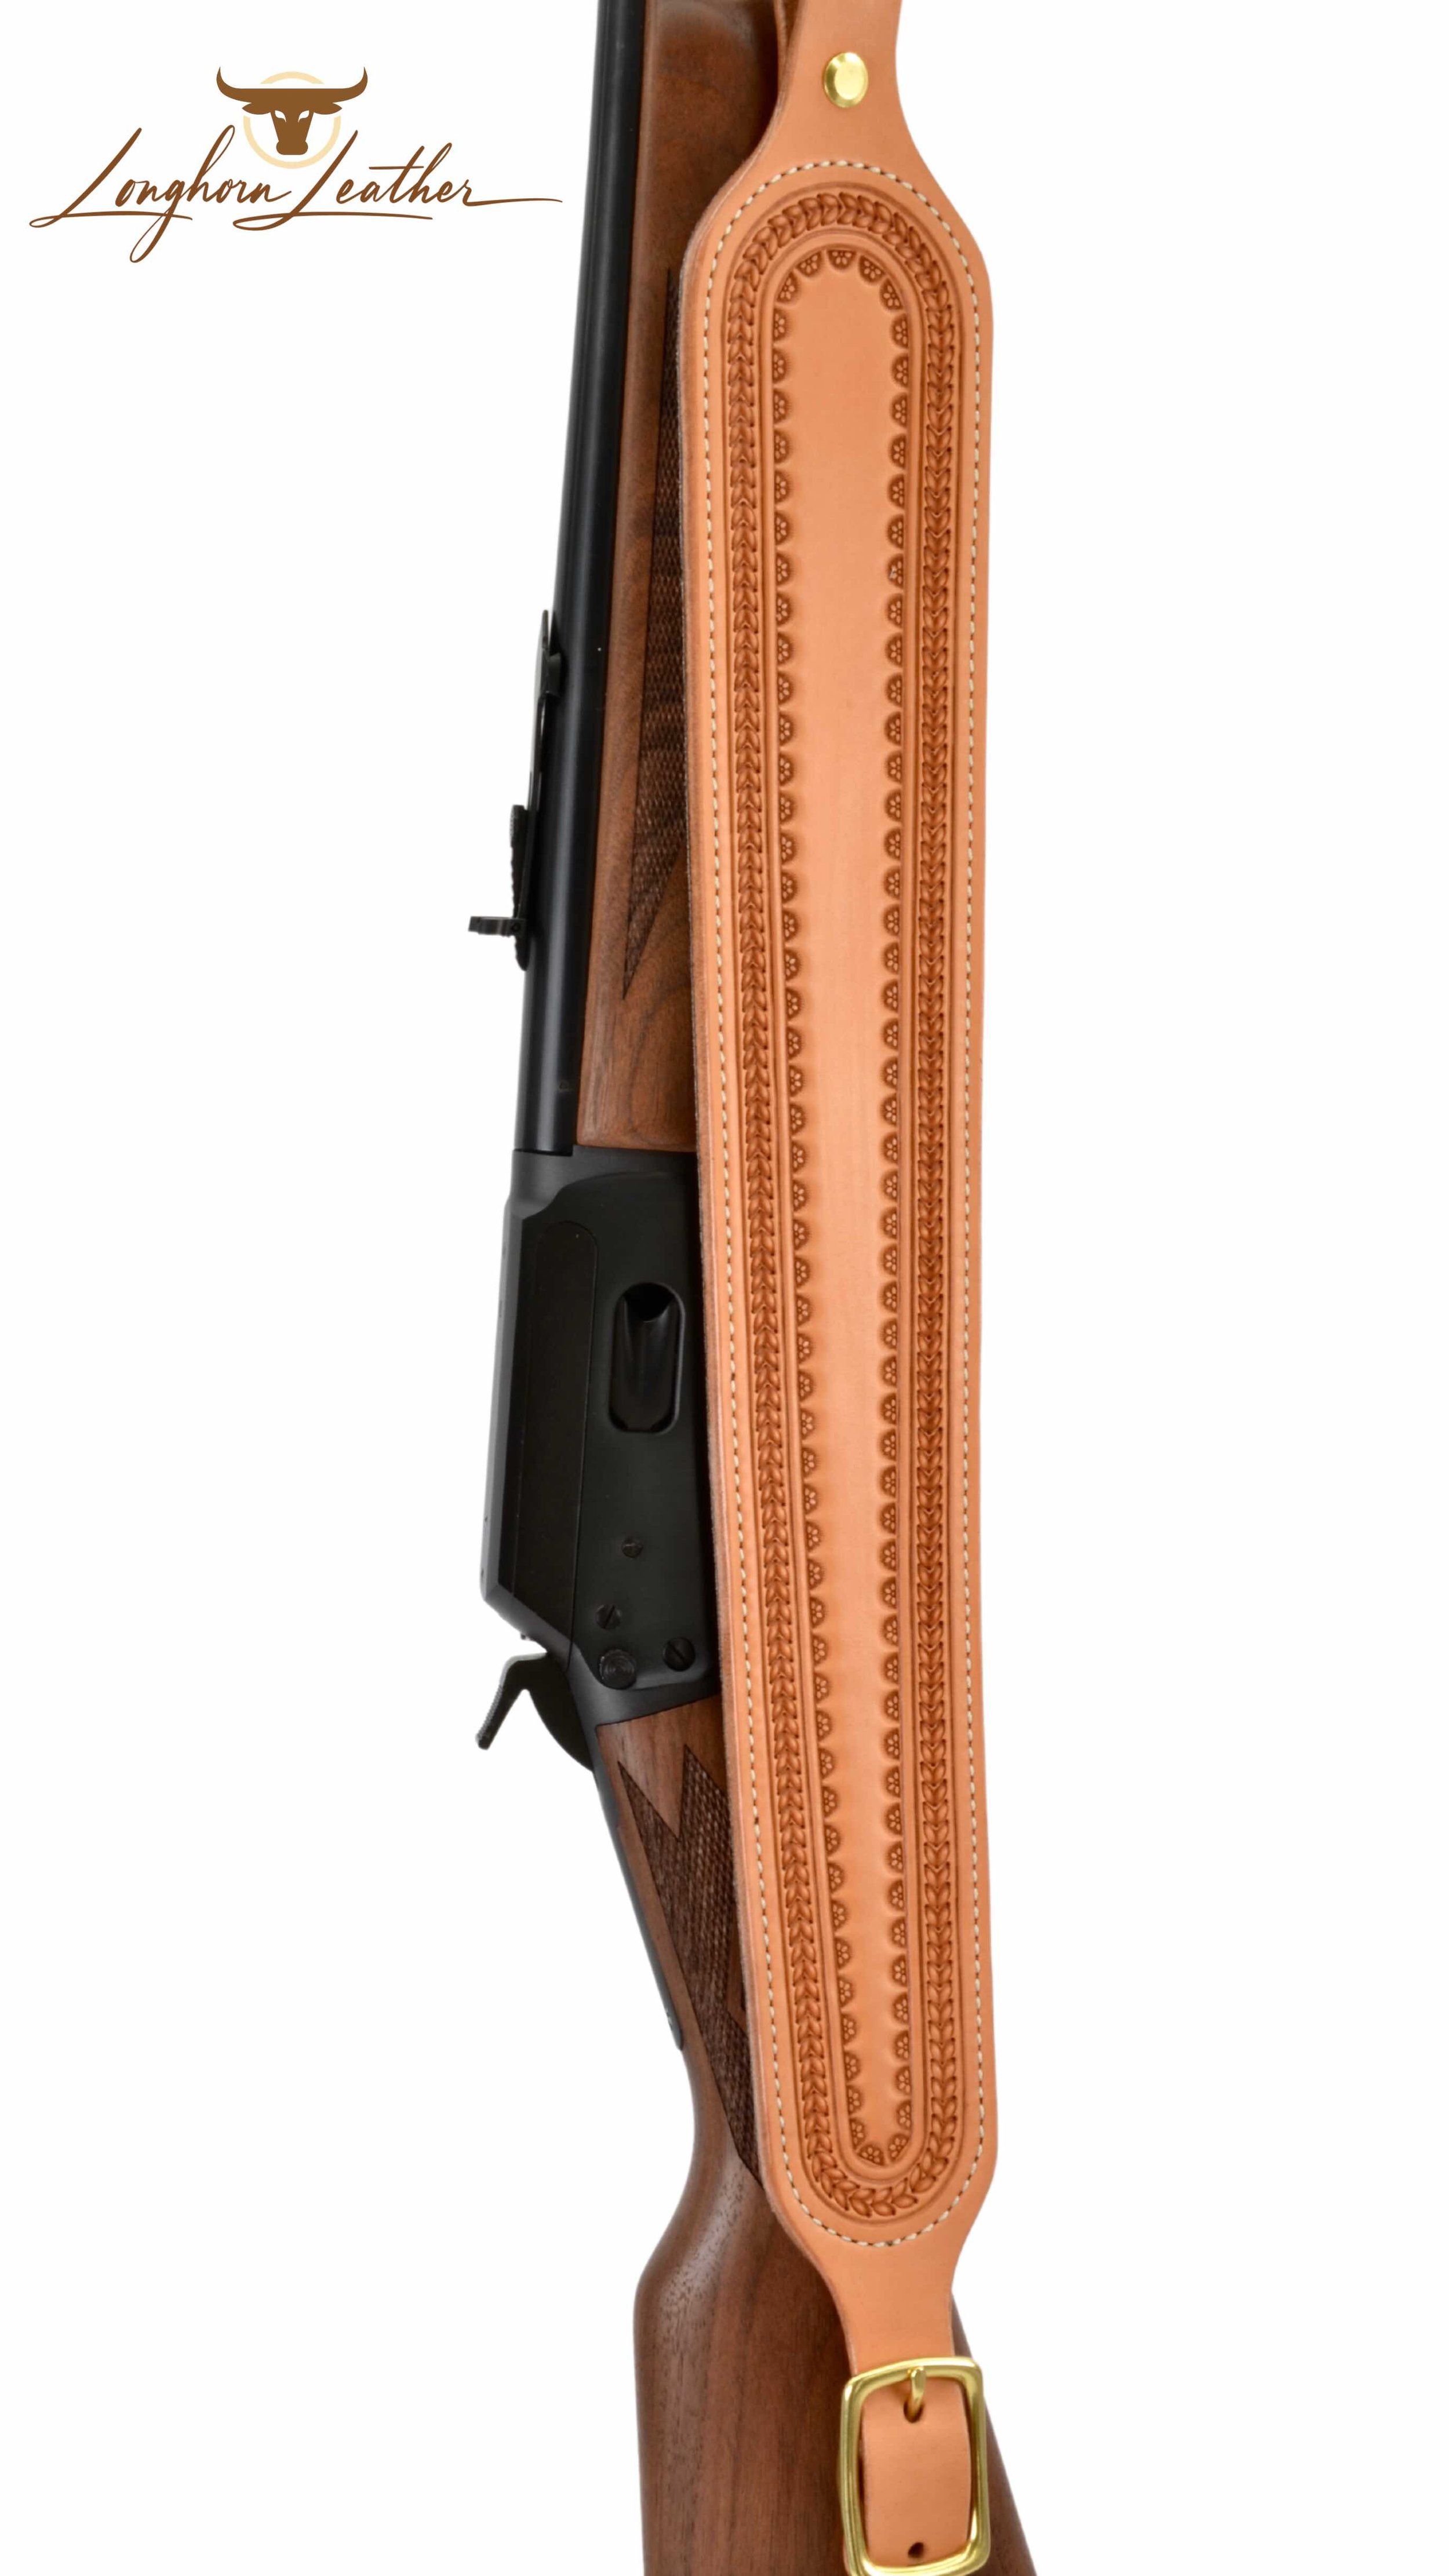 Custom leather rifle sling featuring the Bisbee design.  Individually handcrafted at Longhorn Leather AZ